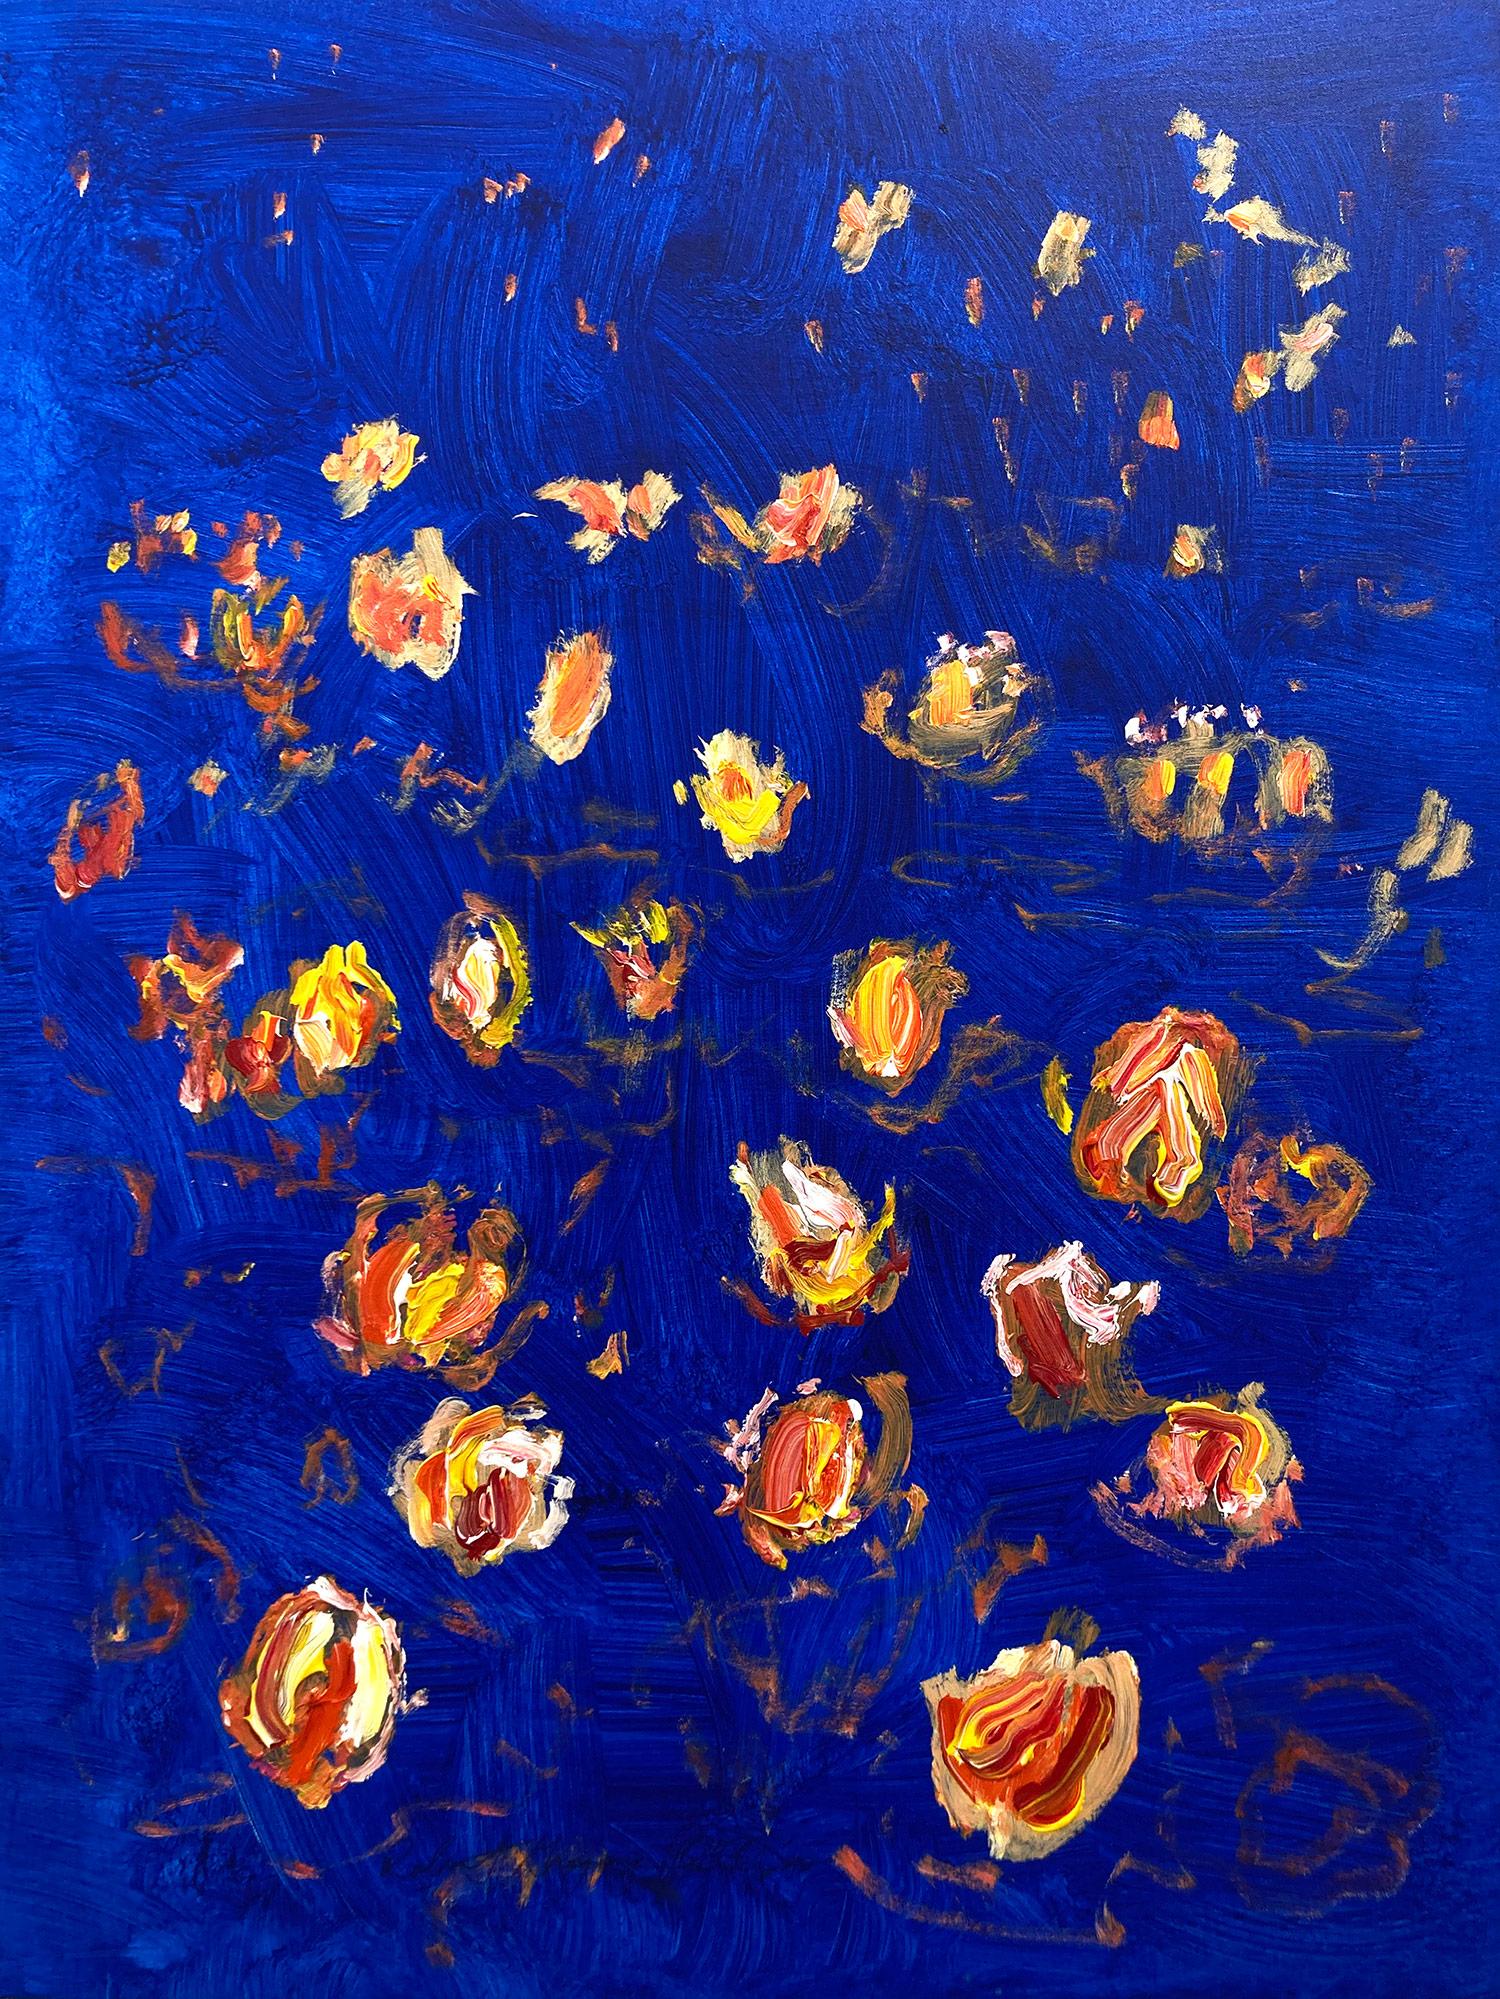 "The Water Garden in Deep Royal Blue" Acrylic Painting In the Style of Monet